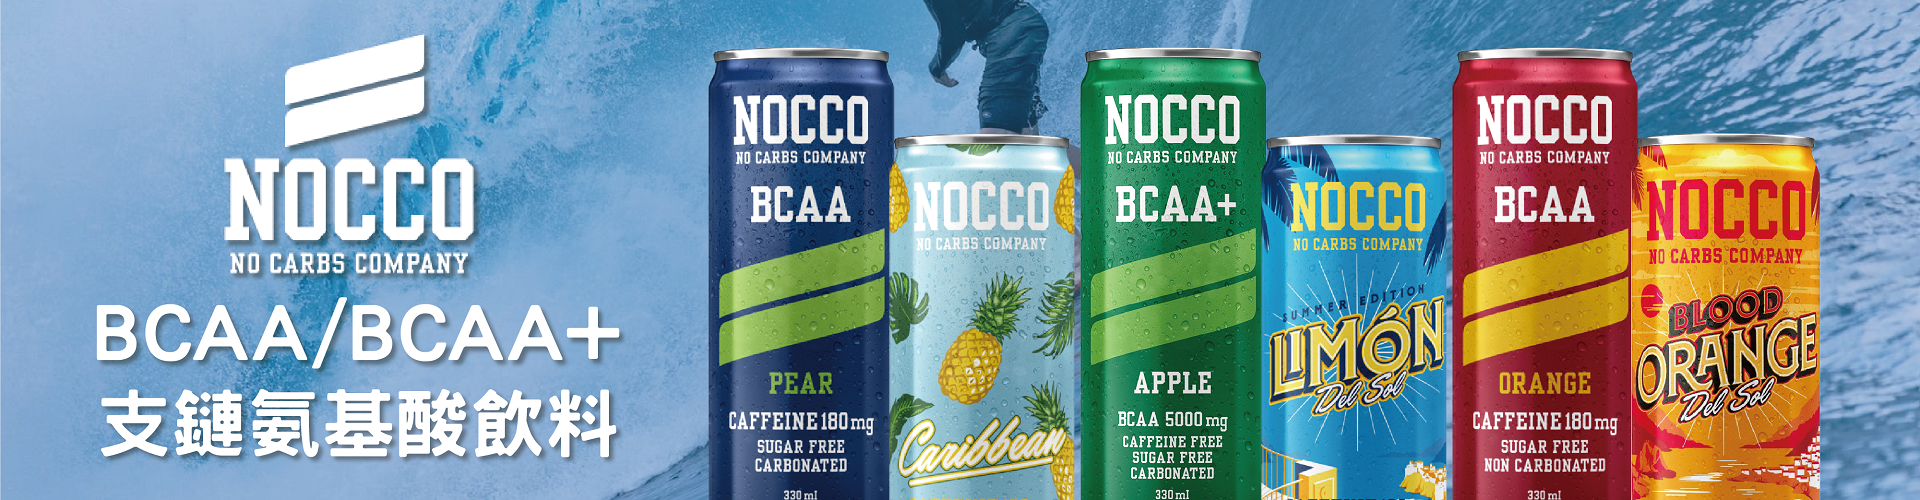 brand_banner_nocco_chi.png